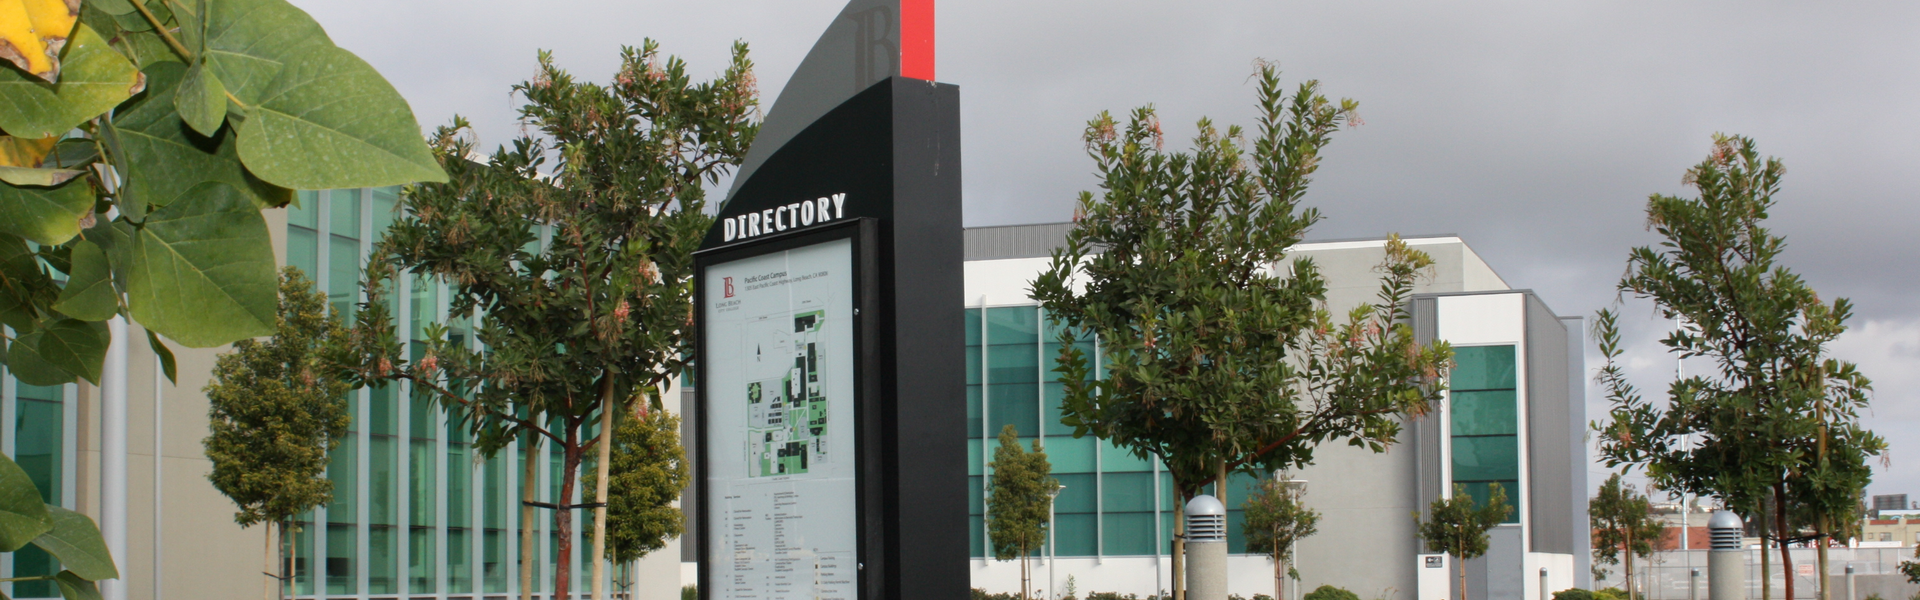 A directory kiosk on the PCC campus.